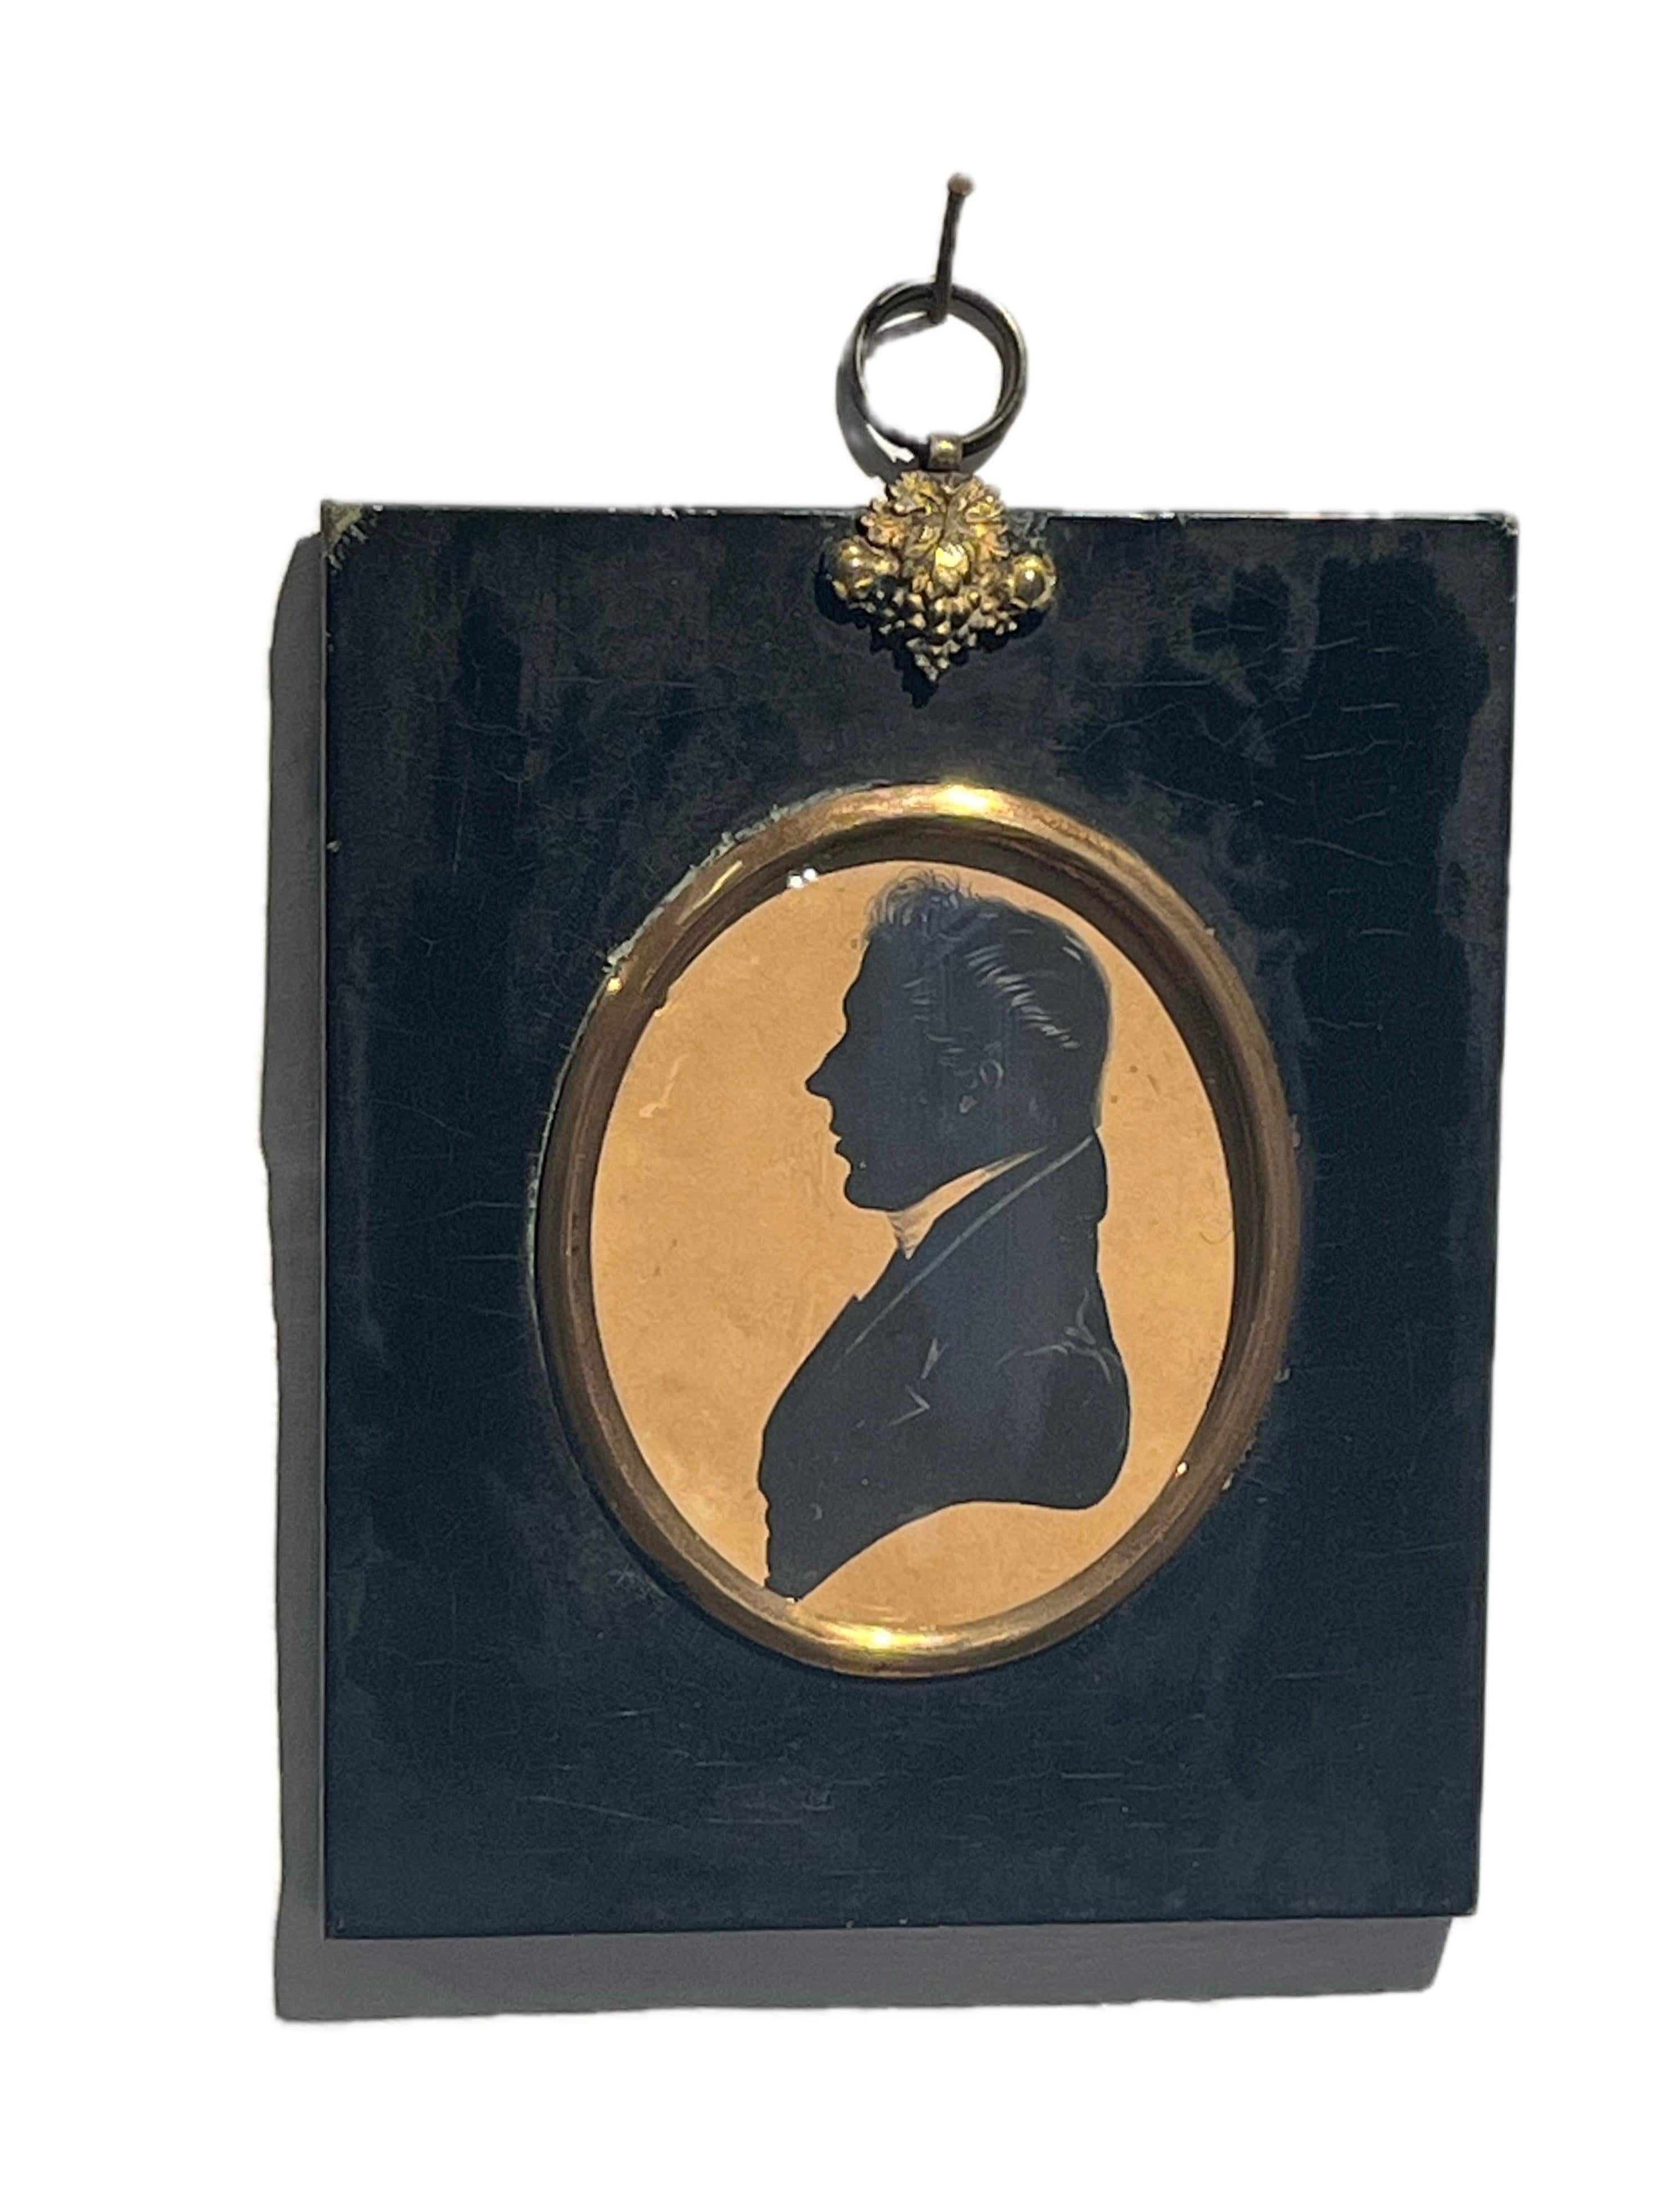 Frederick Frith mid 19th Century English Victorian silhouette portrait For Sale 2